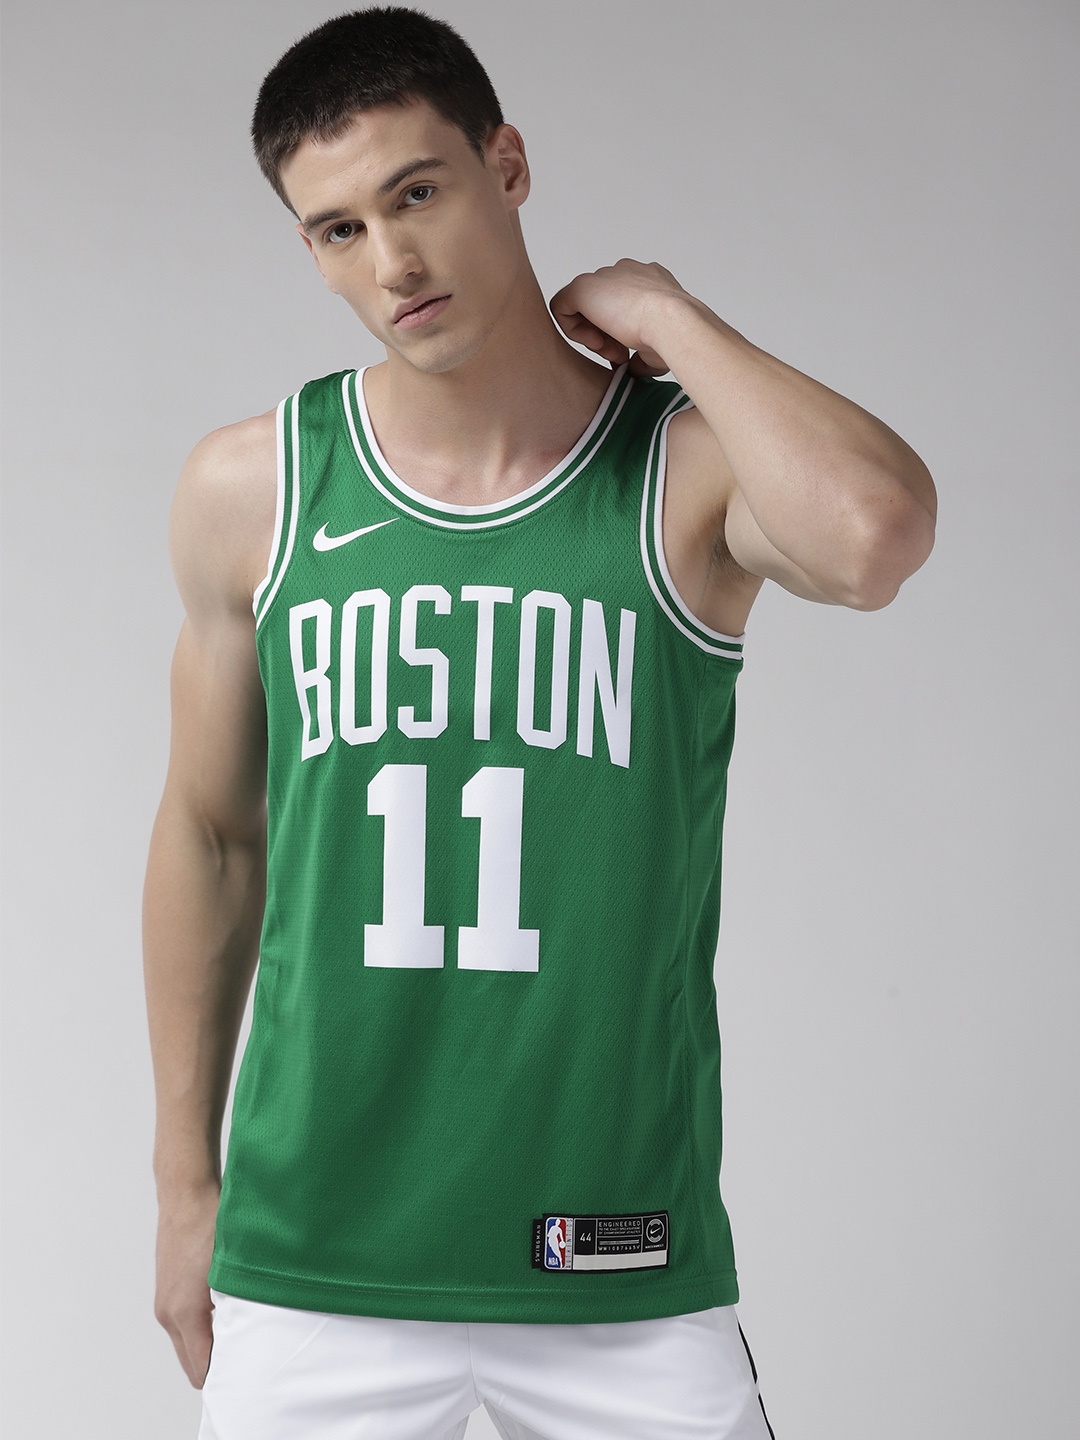 The Nike NBA Jerseys and Gear are Available Now - WearTesters